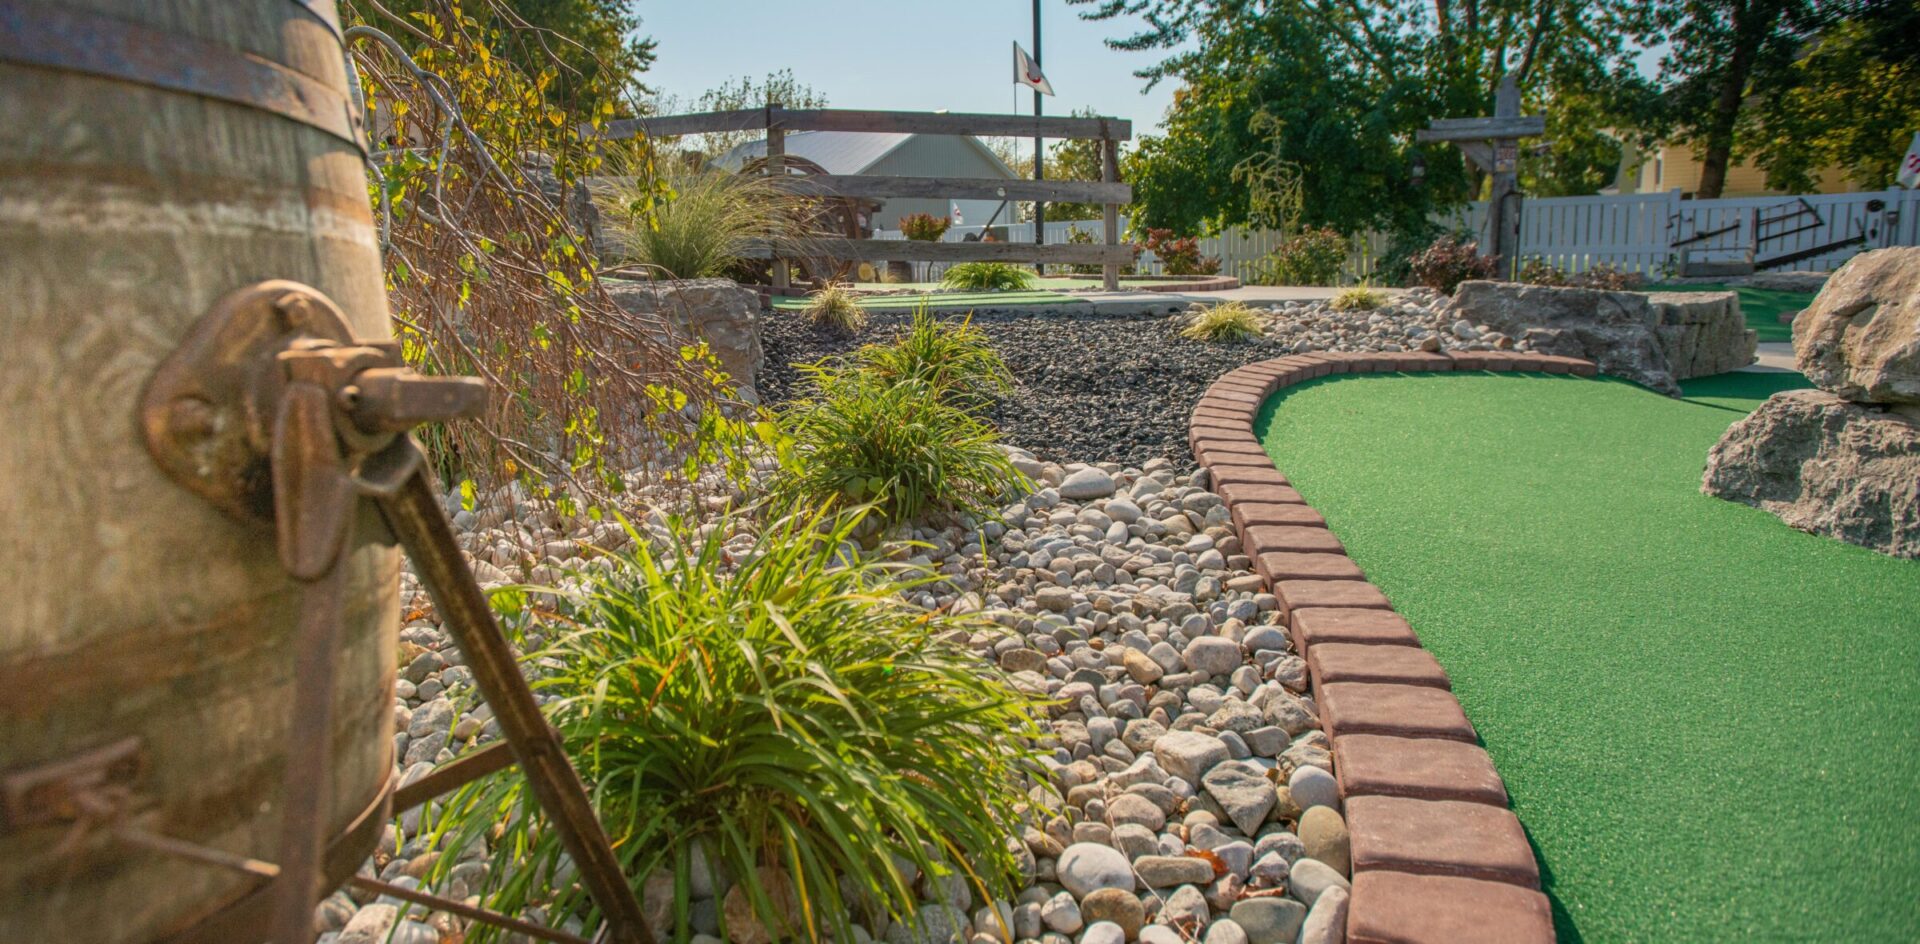 An outdoor mini-golf course with a green artificial turf, surrounded by stones, greenery, and a wooden barrel on the left foreground.